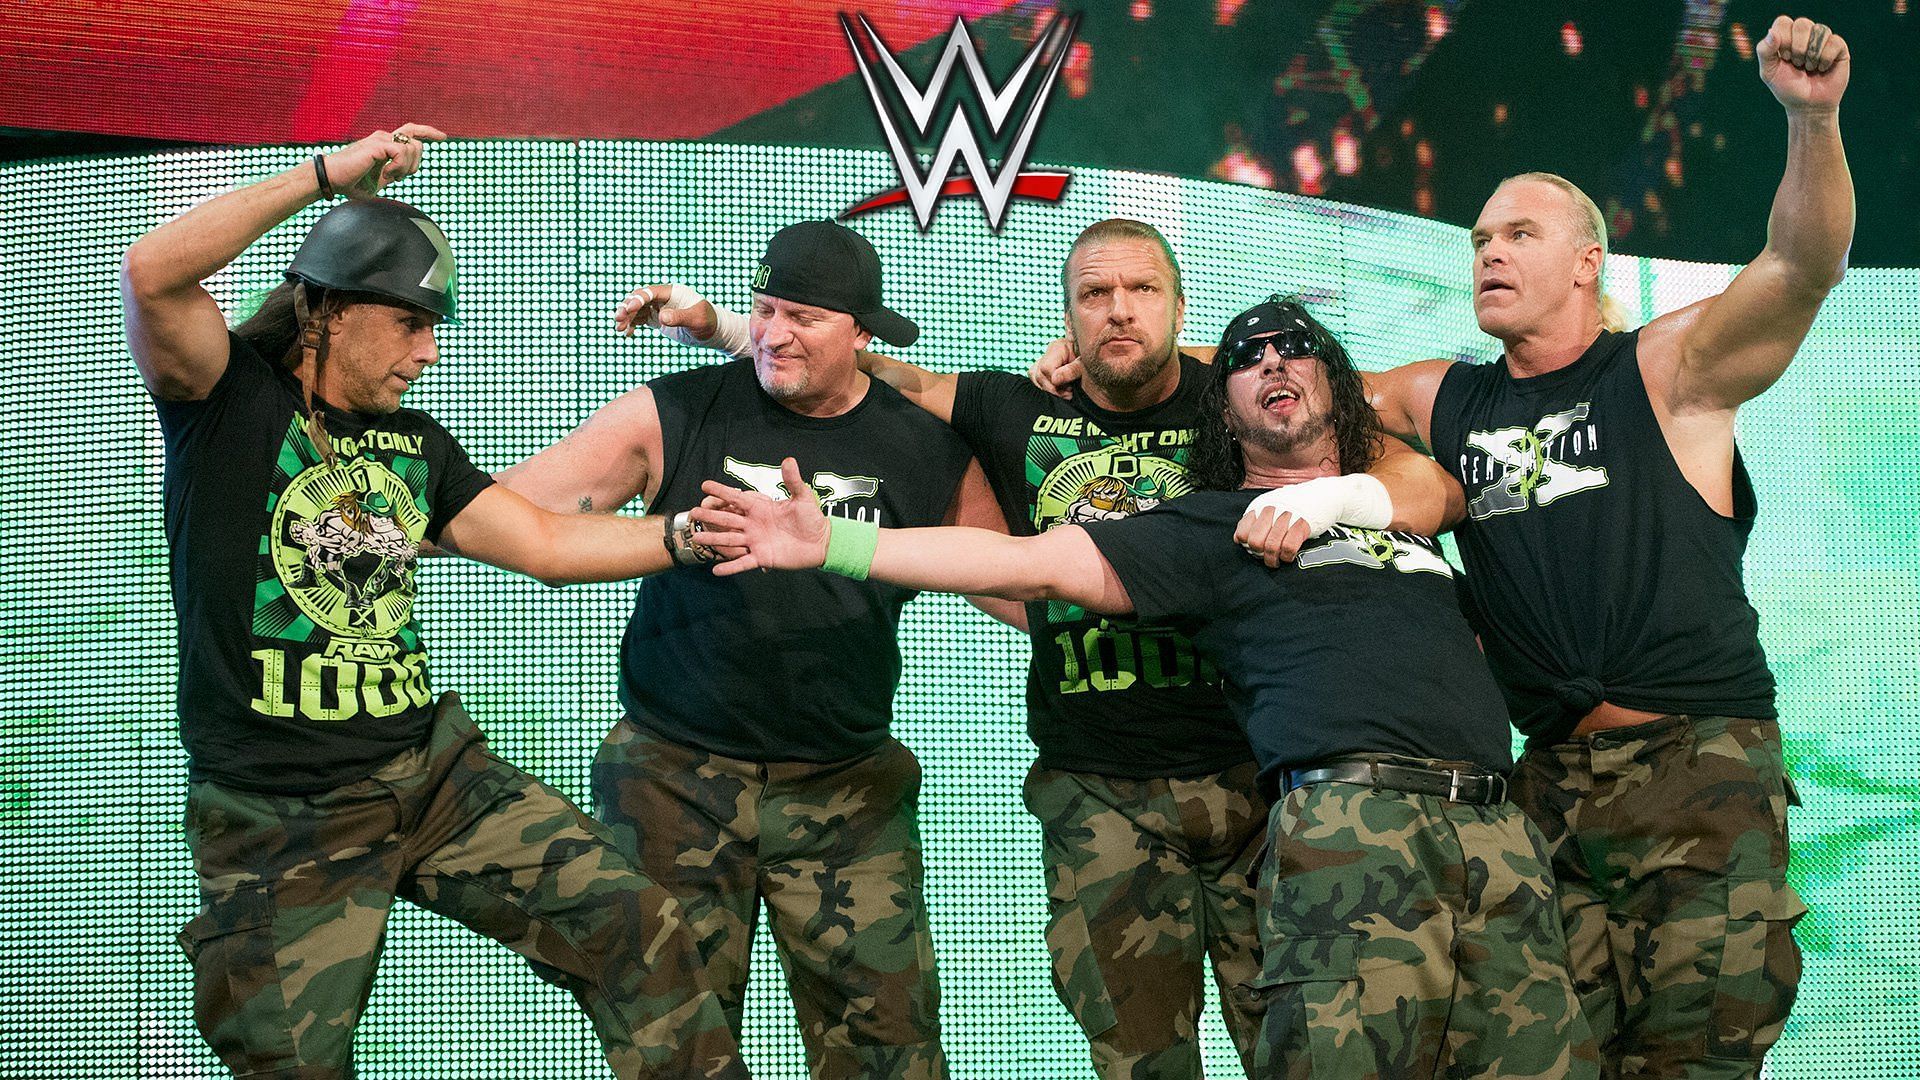 DX is one of the most iconic factions in WWE